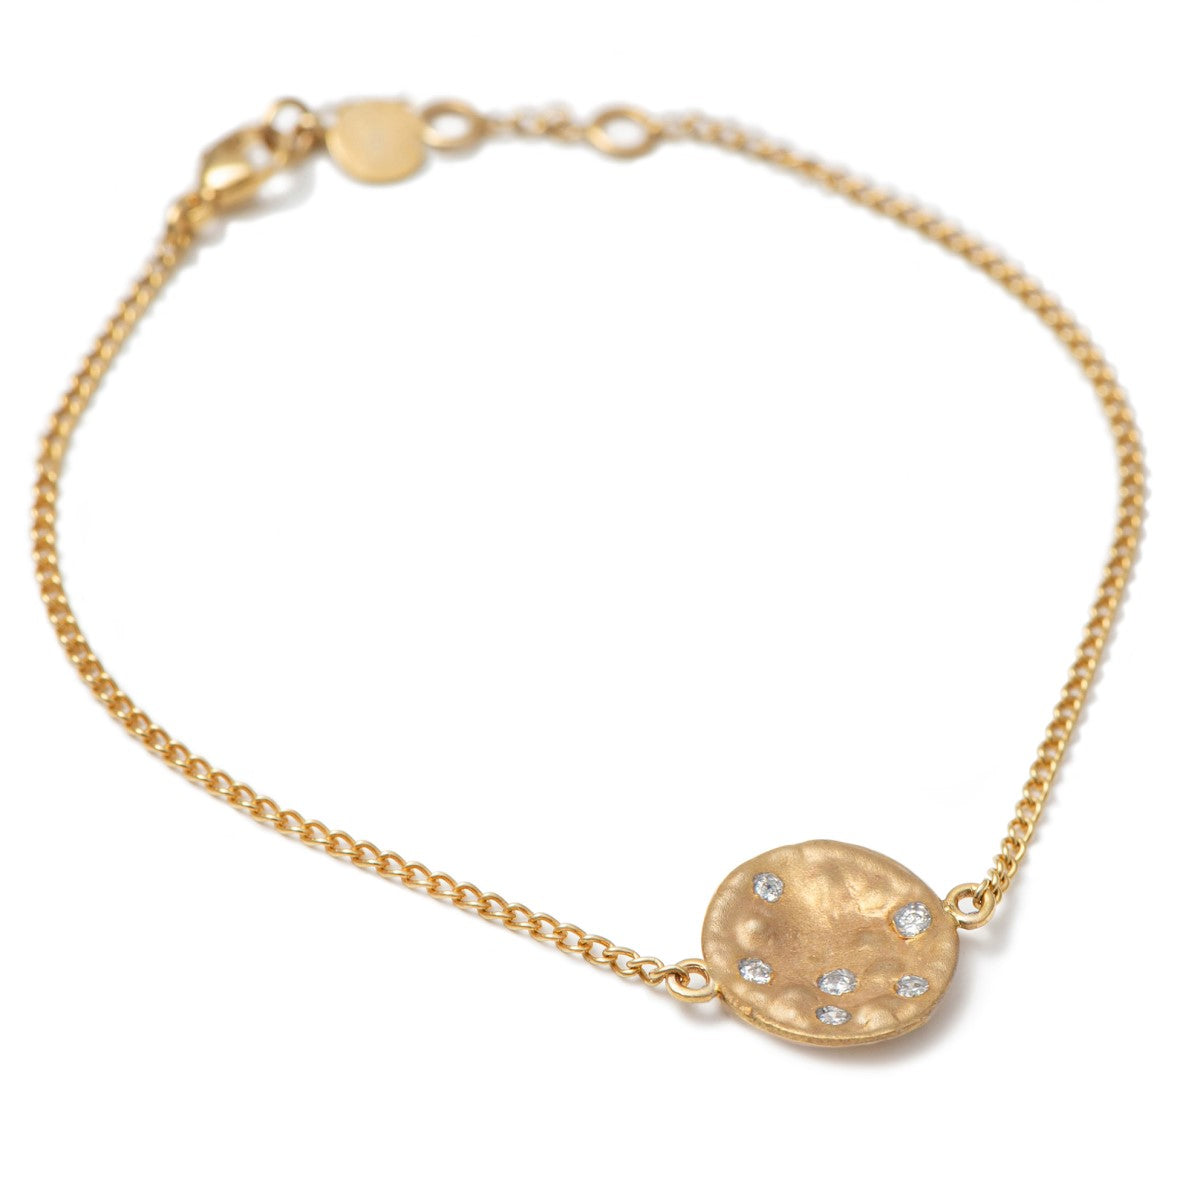 Bracelet in 9k Yellow Gold with Small Disc and Diamonds